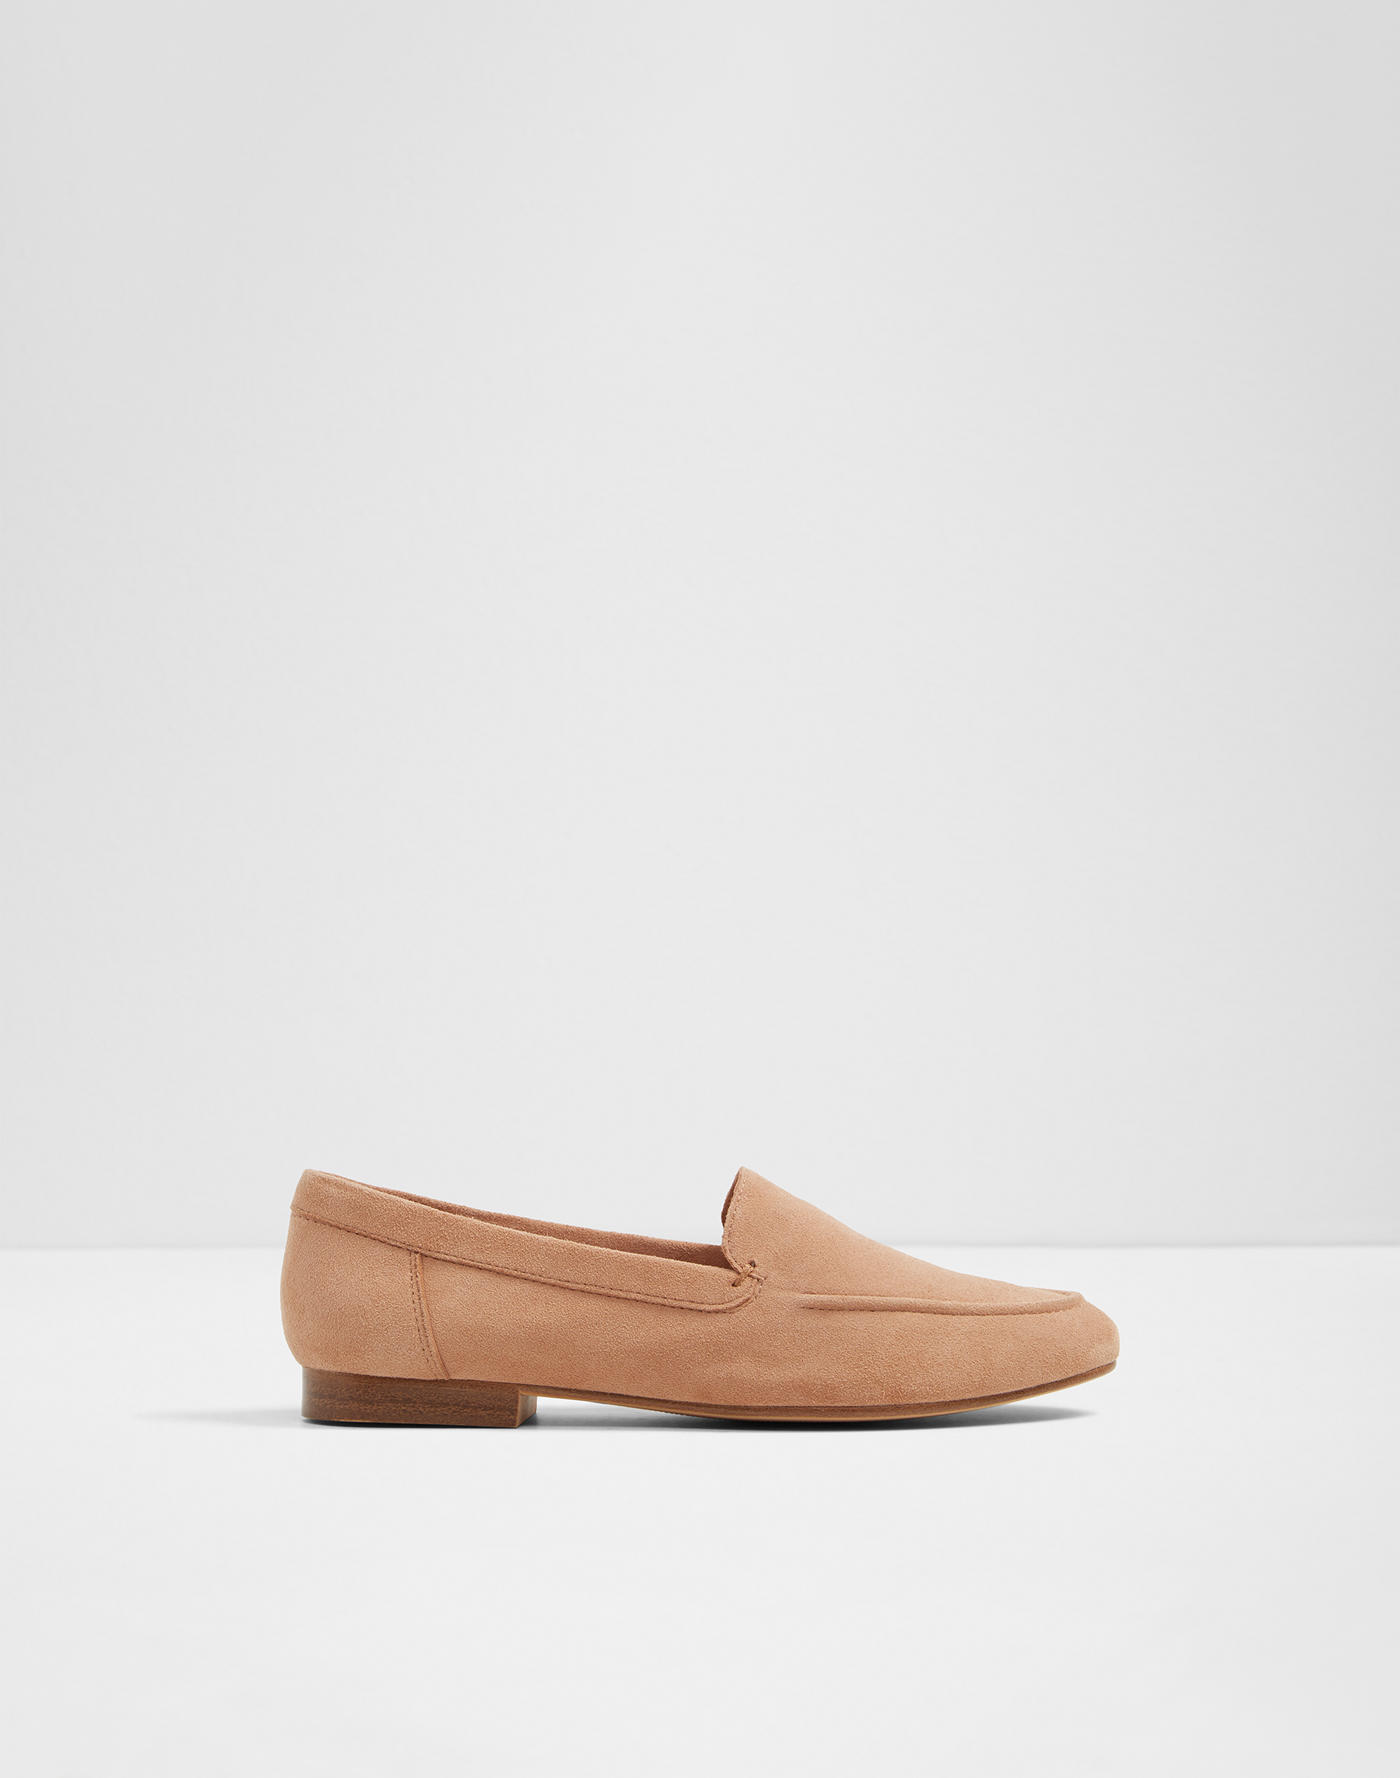 Clearance | Women's Flats on Clearance 